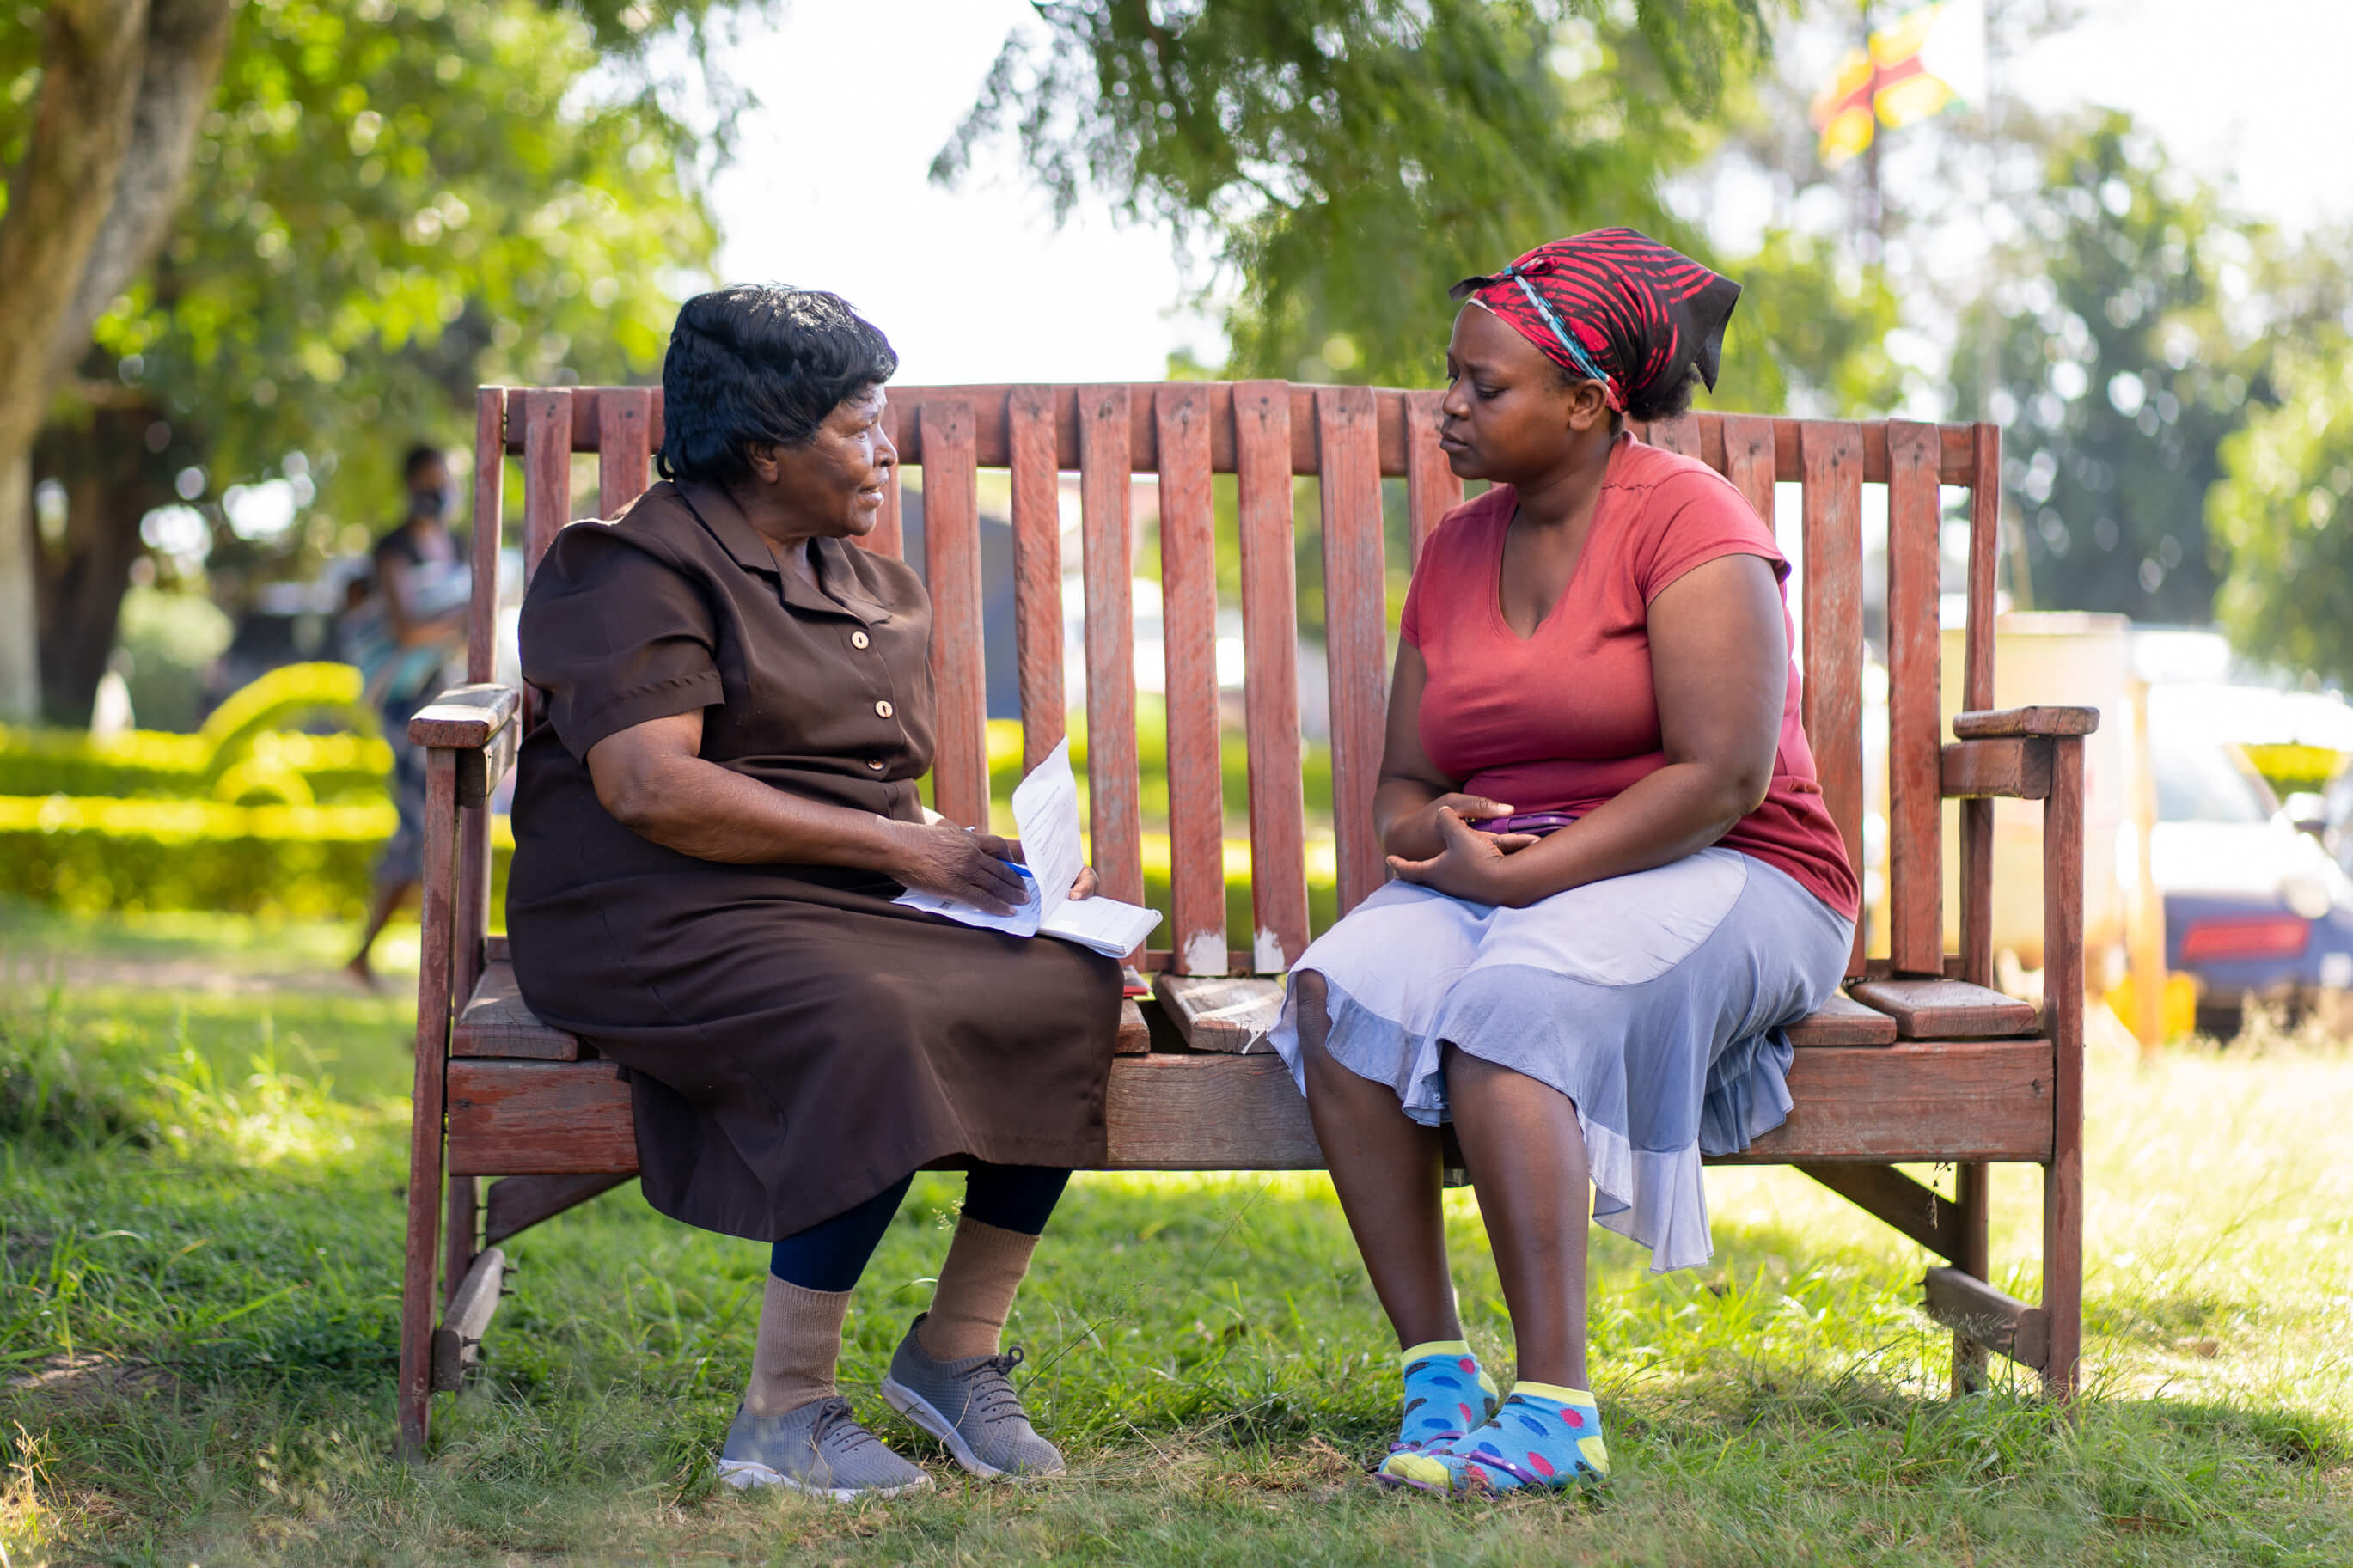 An older woman and younger woman on a bench